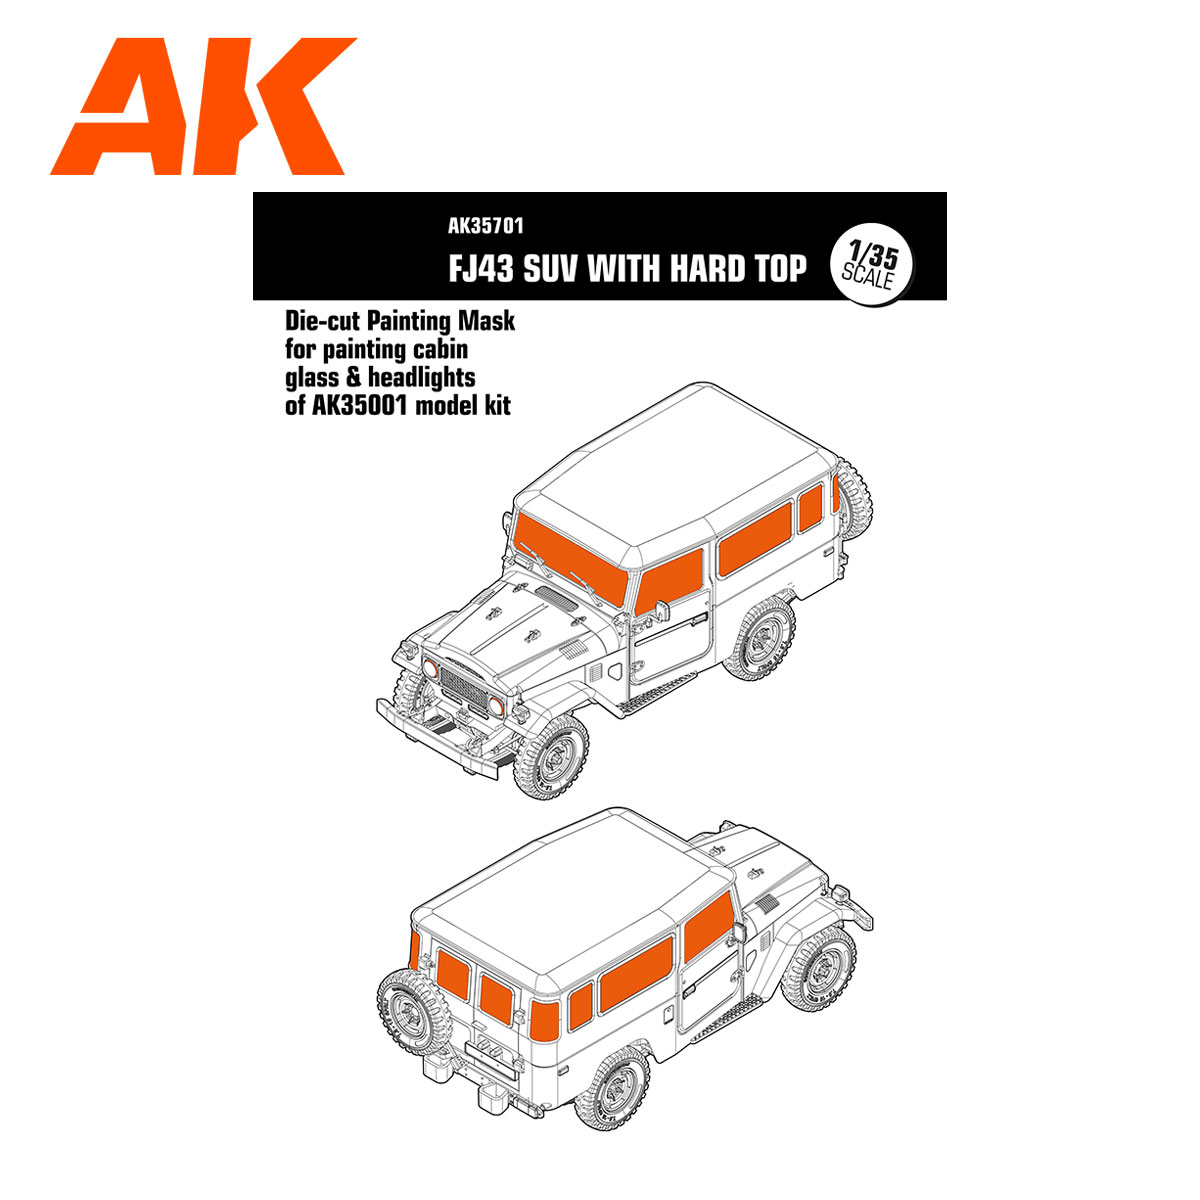 DIE-CUT PAINTING MASK FOR PAINTING CABIN GLASS & HEADLIGHTS OF AK35001 MODEL KIT